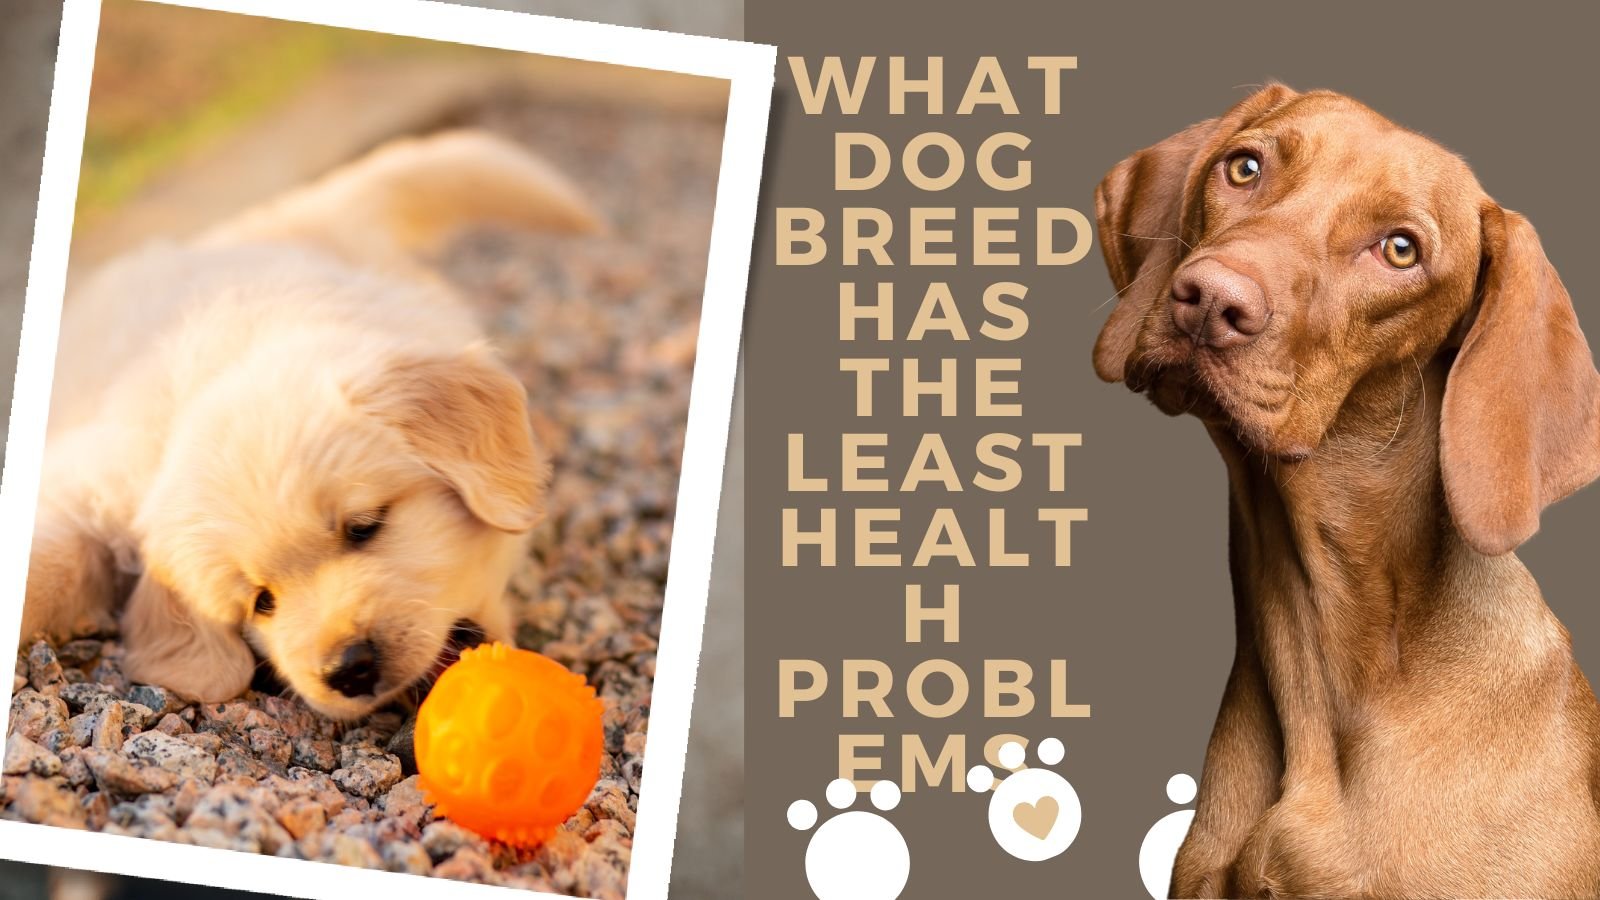 What dog breed has the least health